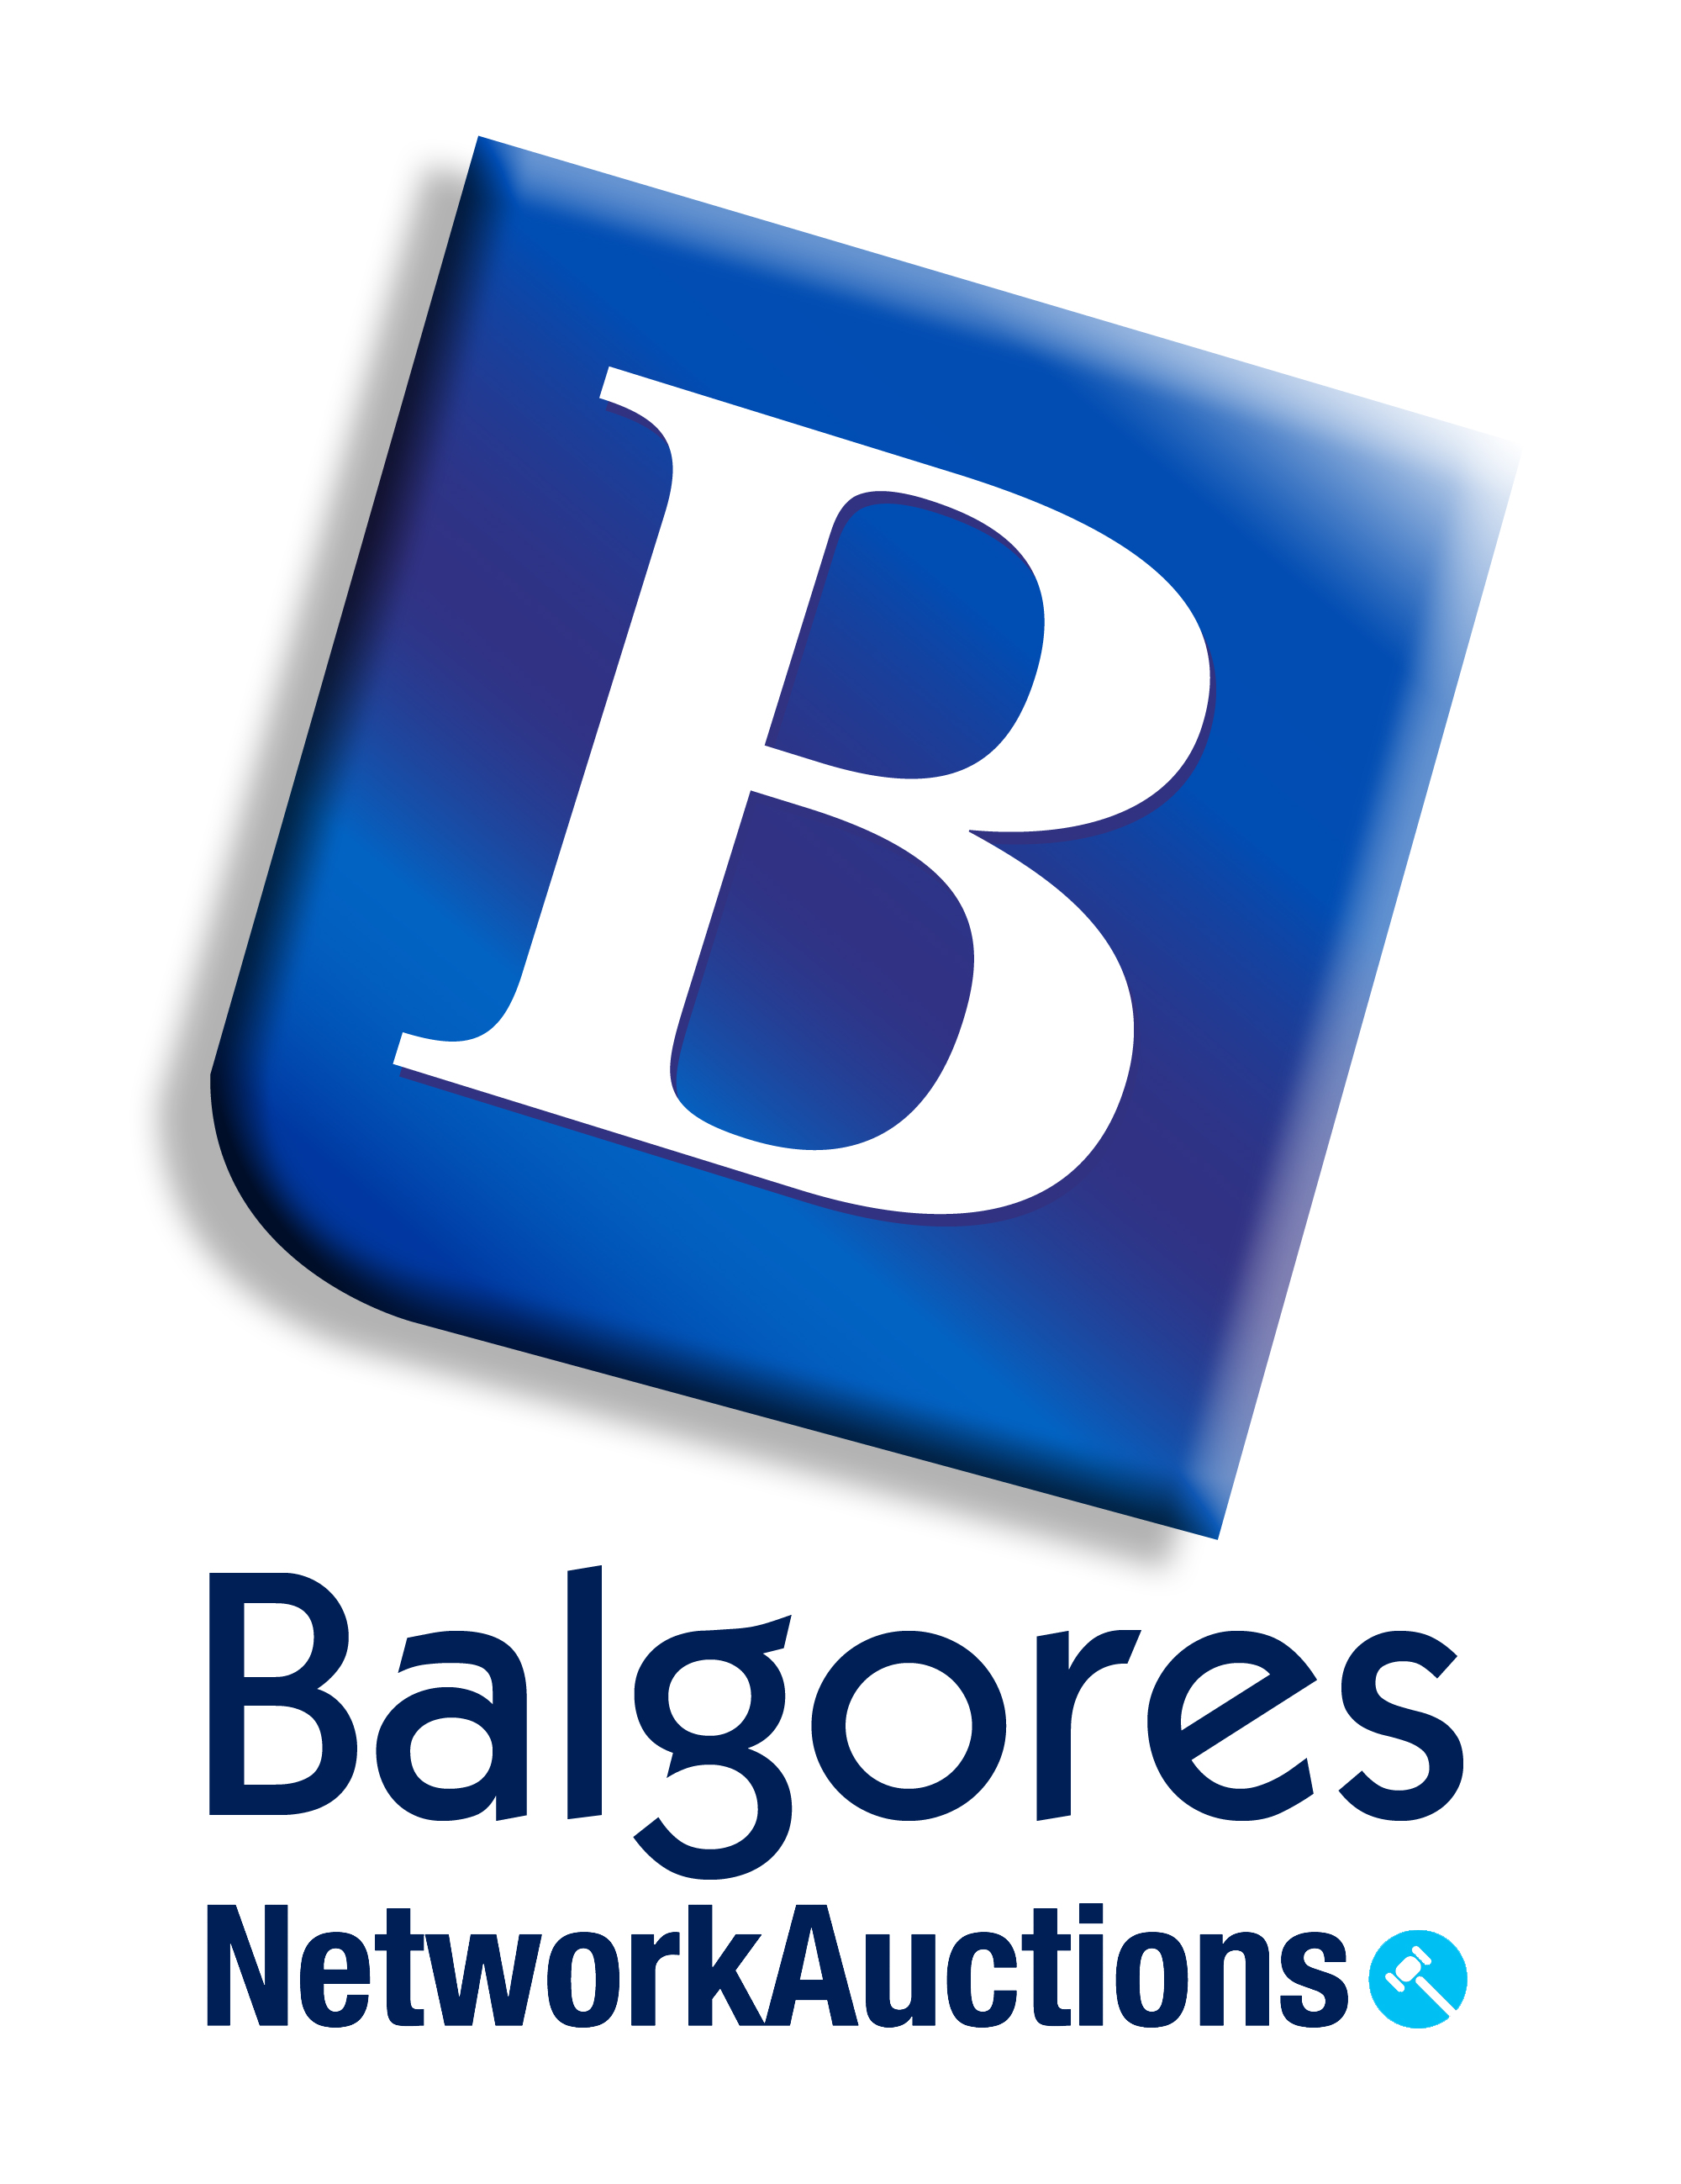 Please contact Balgores Network Auctions on 01245 323729.